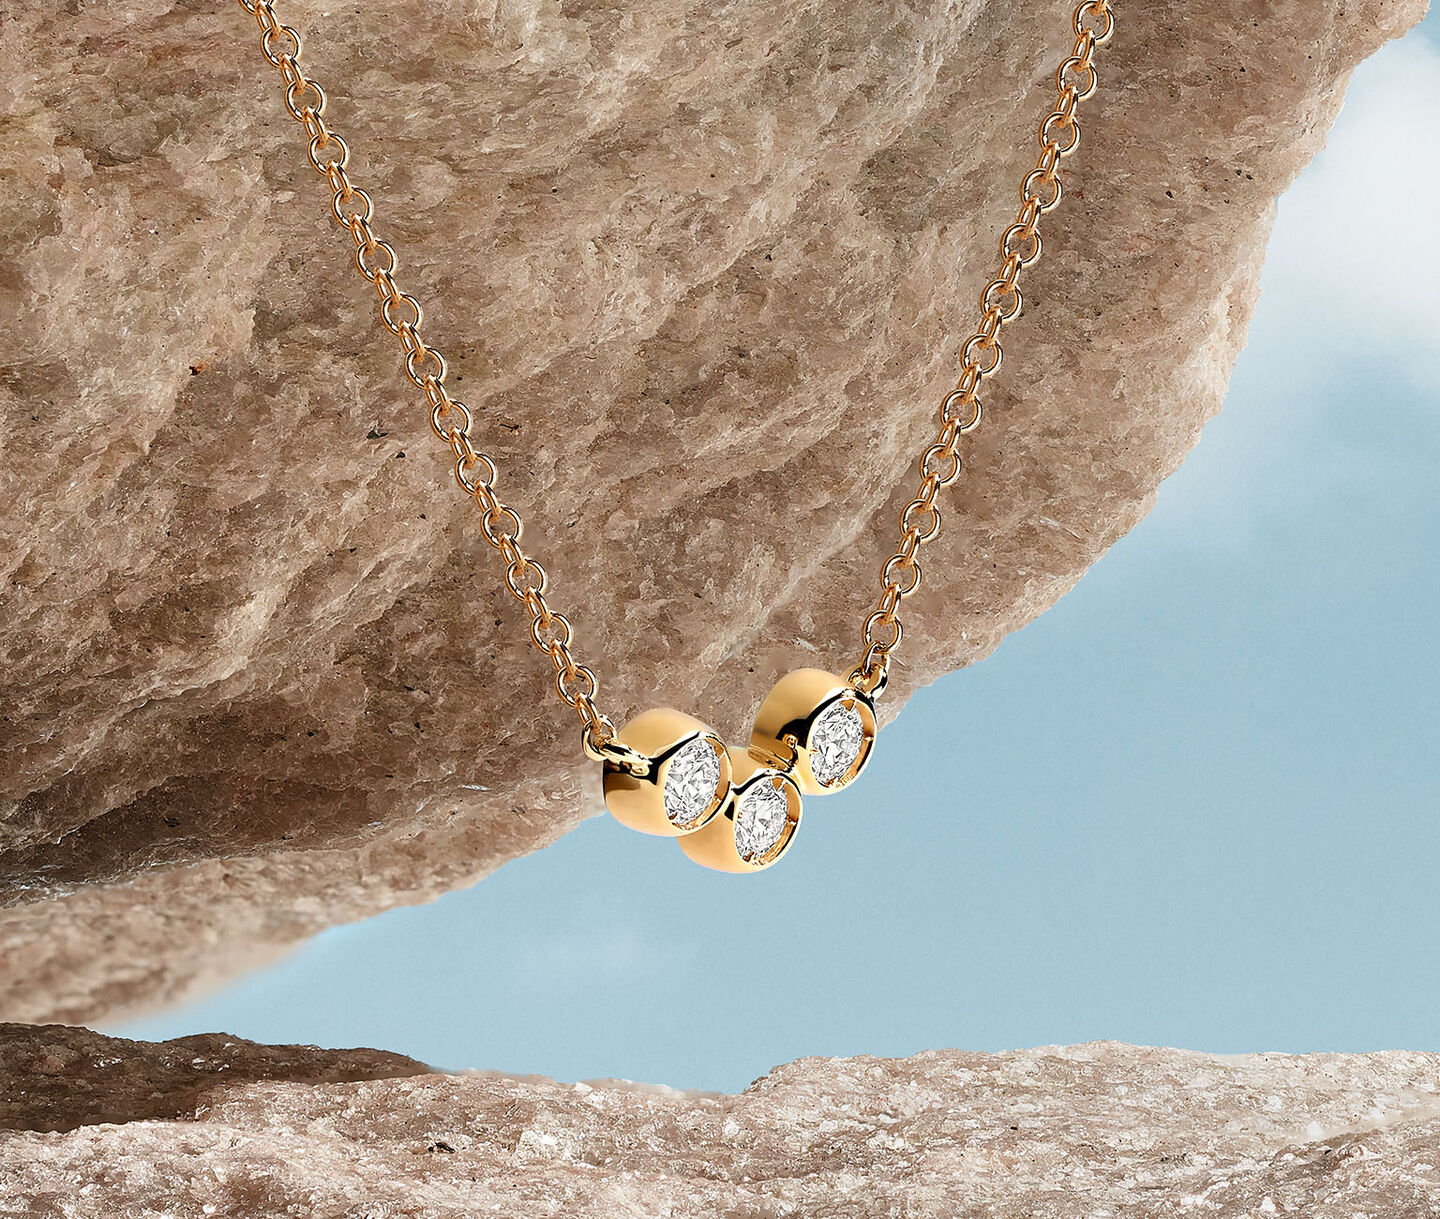 A Birks Iconic Splash pendant in rose gold with diamonds hanging off a rock.